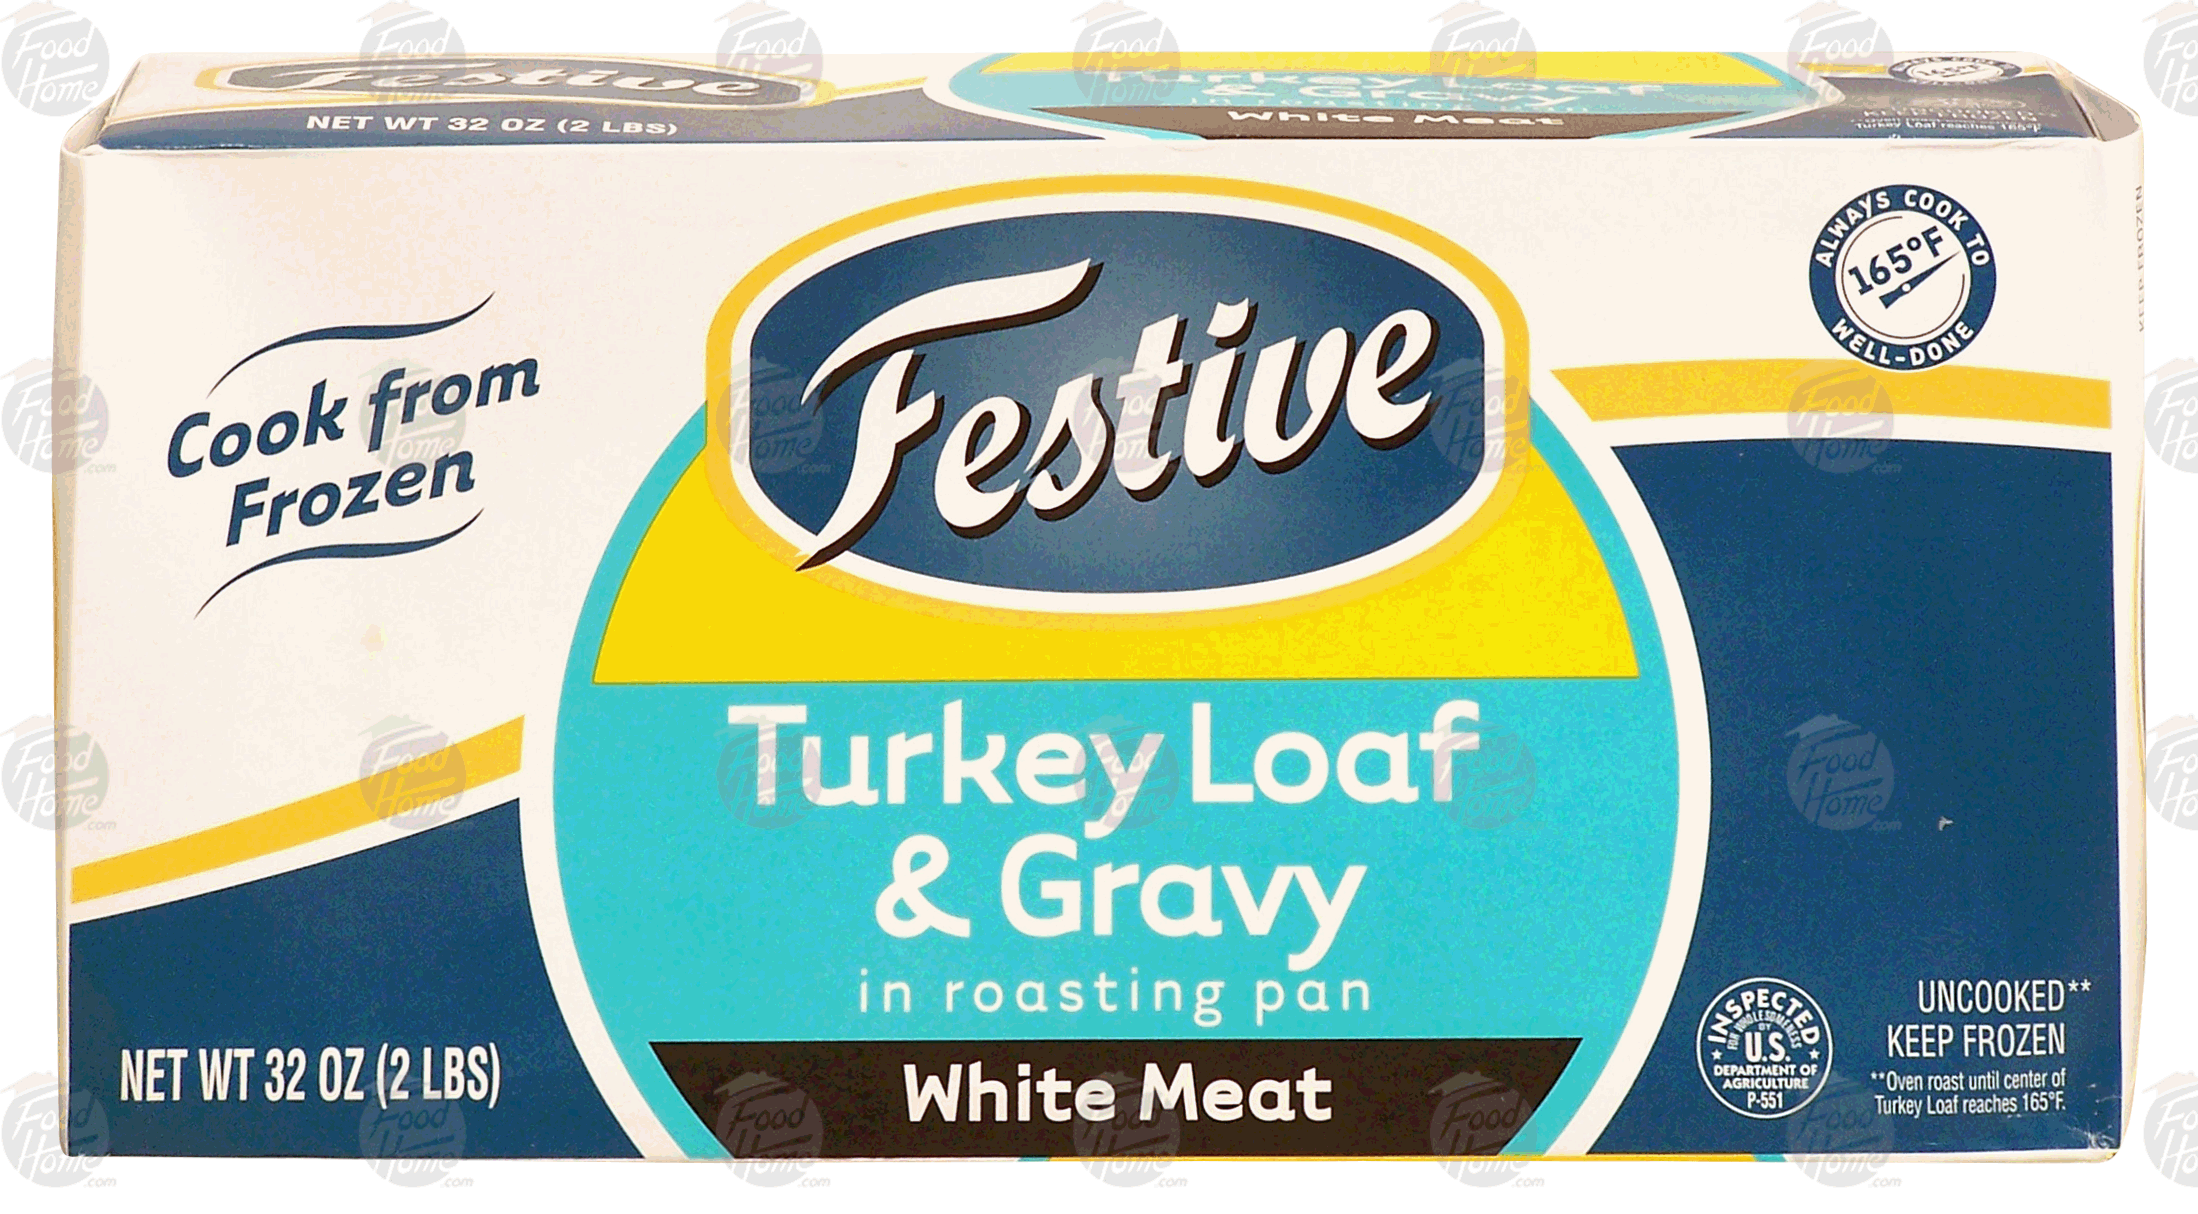 Festive  turkey loaf & gravy in a roasting pan, white meat Full-Size Picture